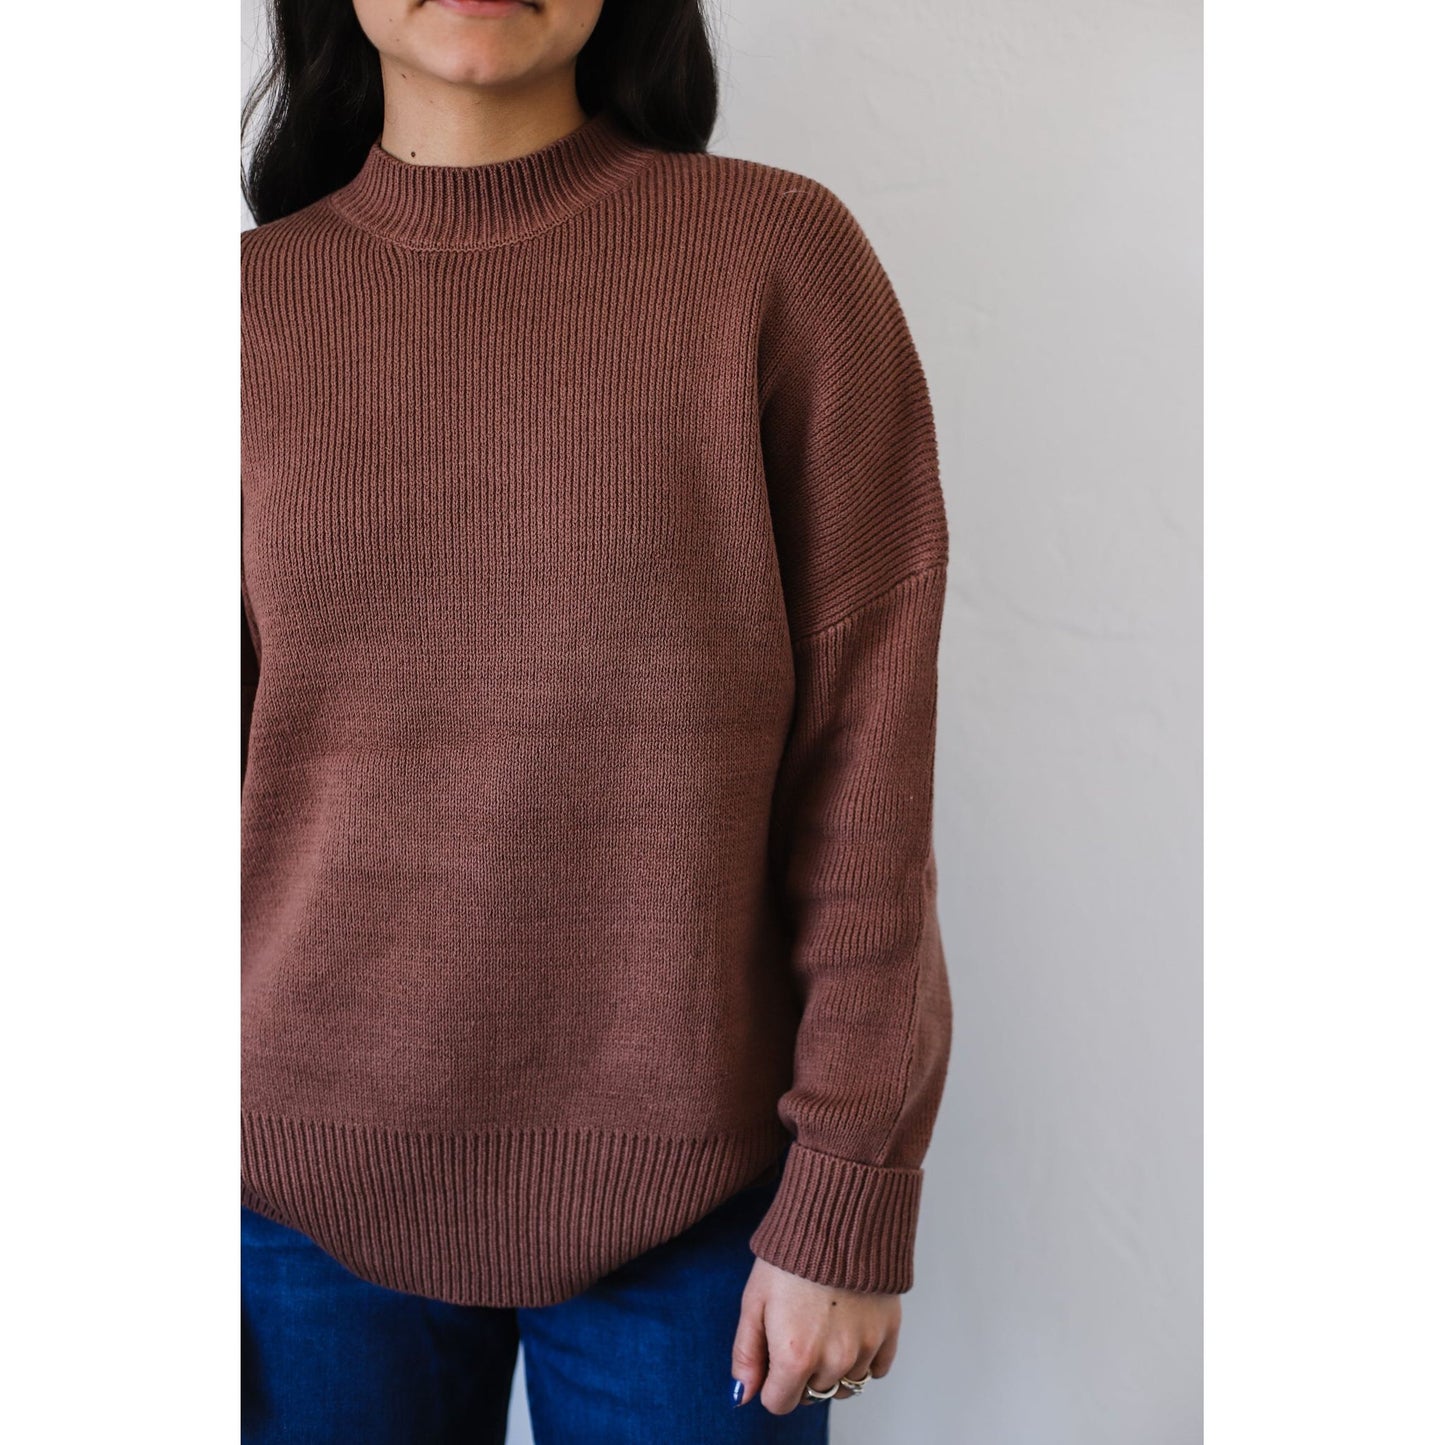 Briley Sweater